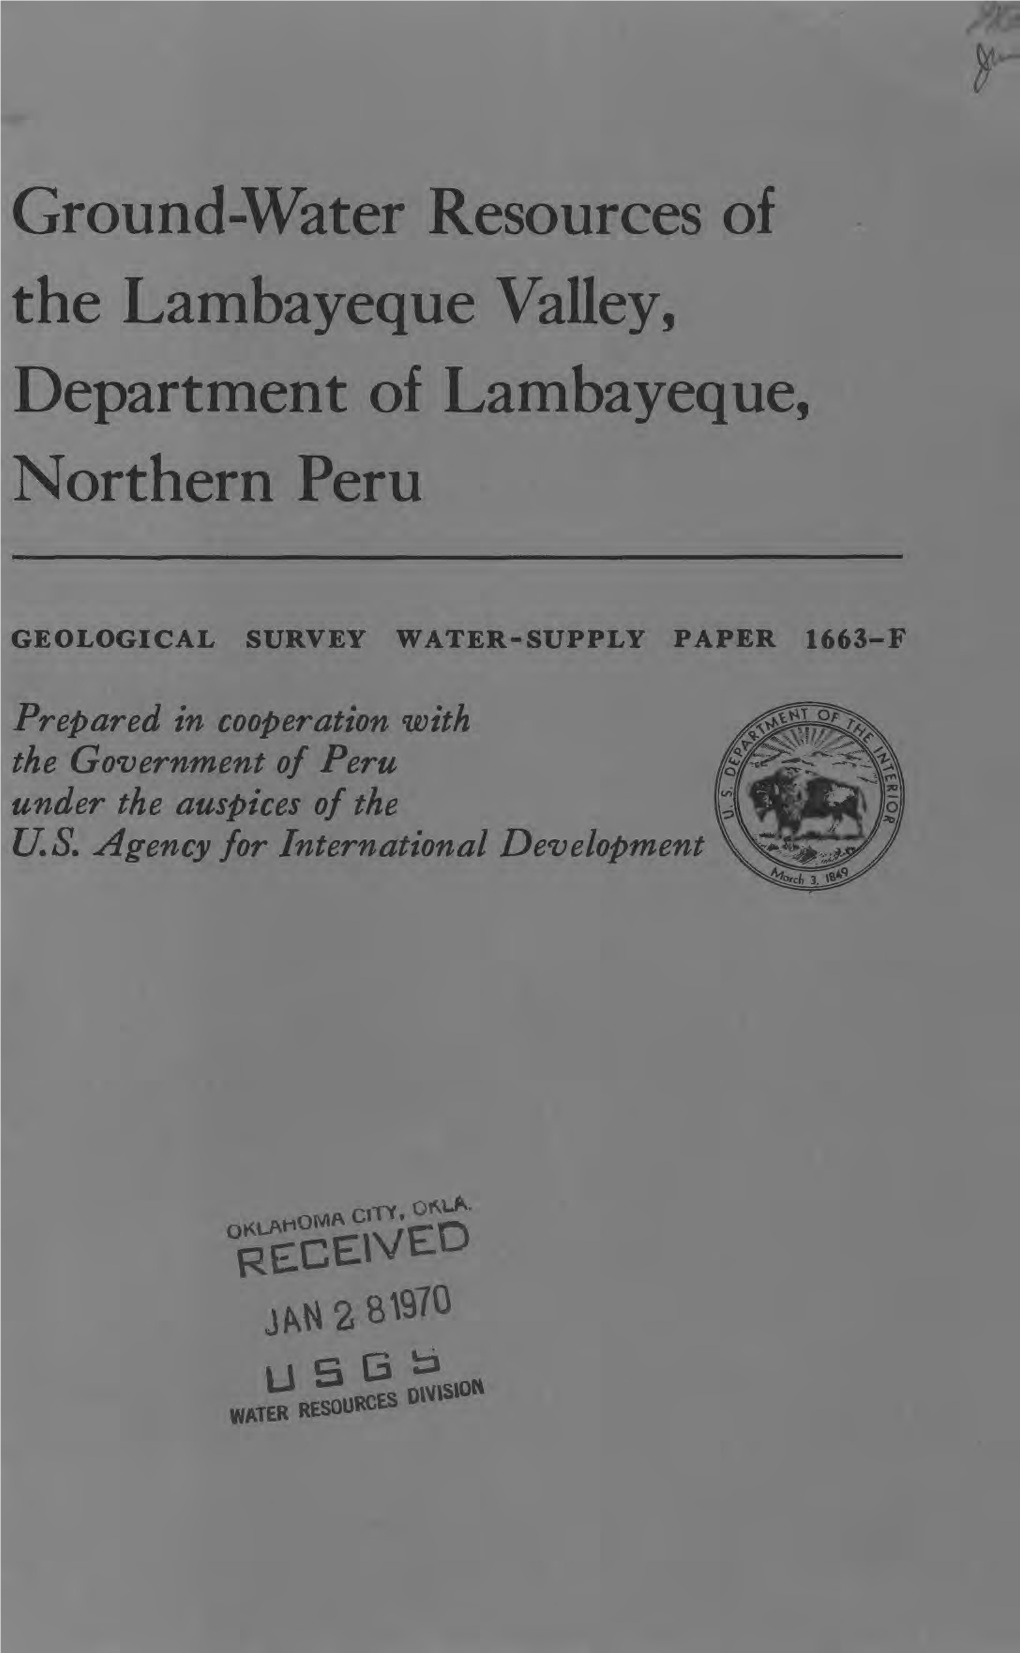 Ground-Water Resources of the Lambayeque Valley, Department of Lambayeque, Northern Peru